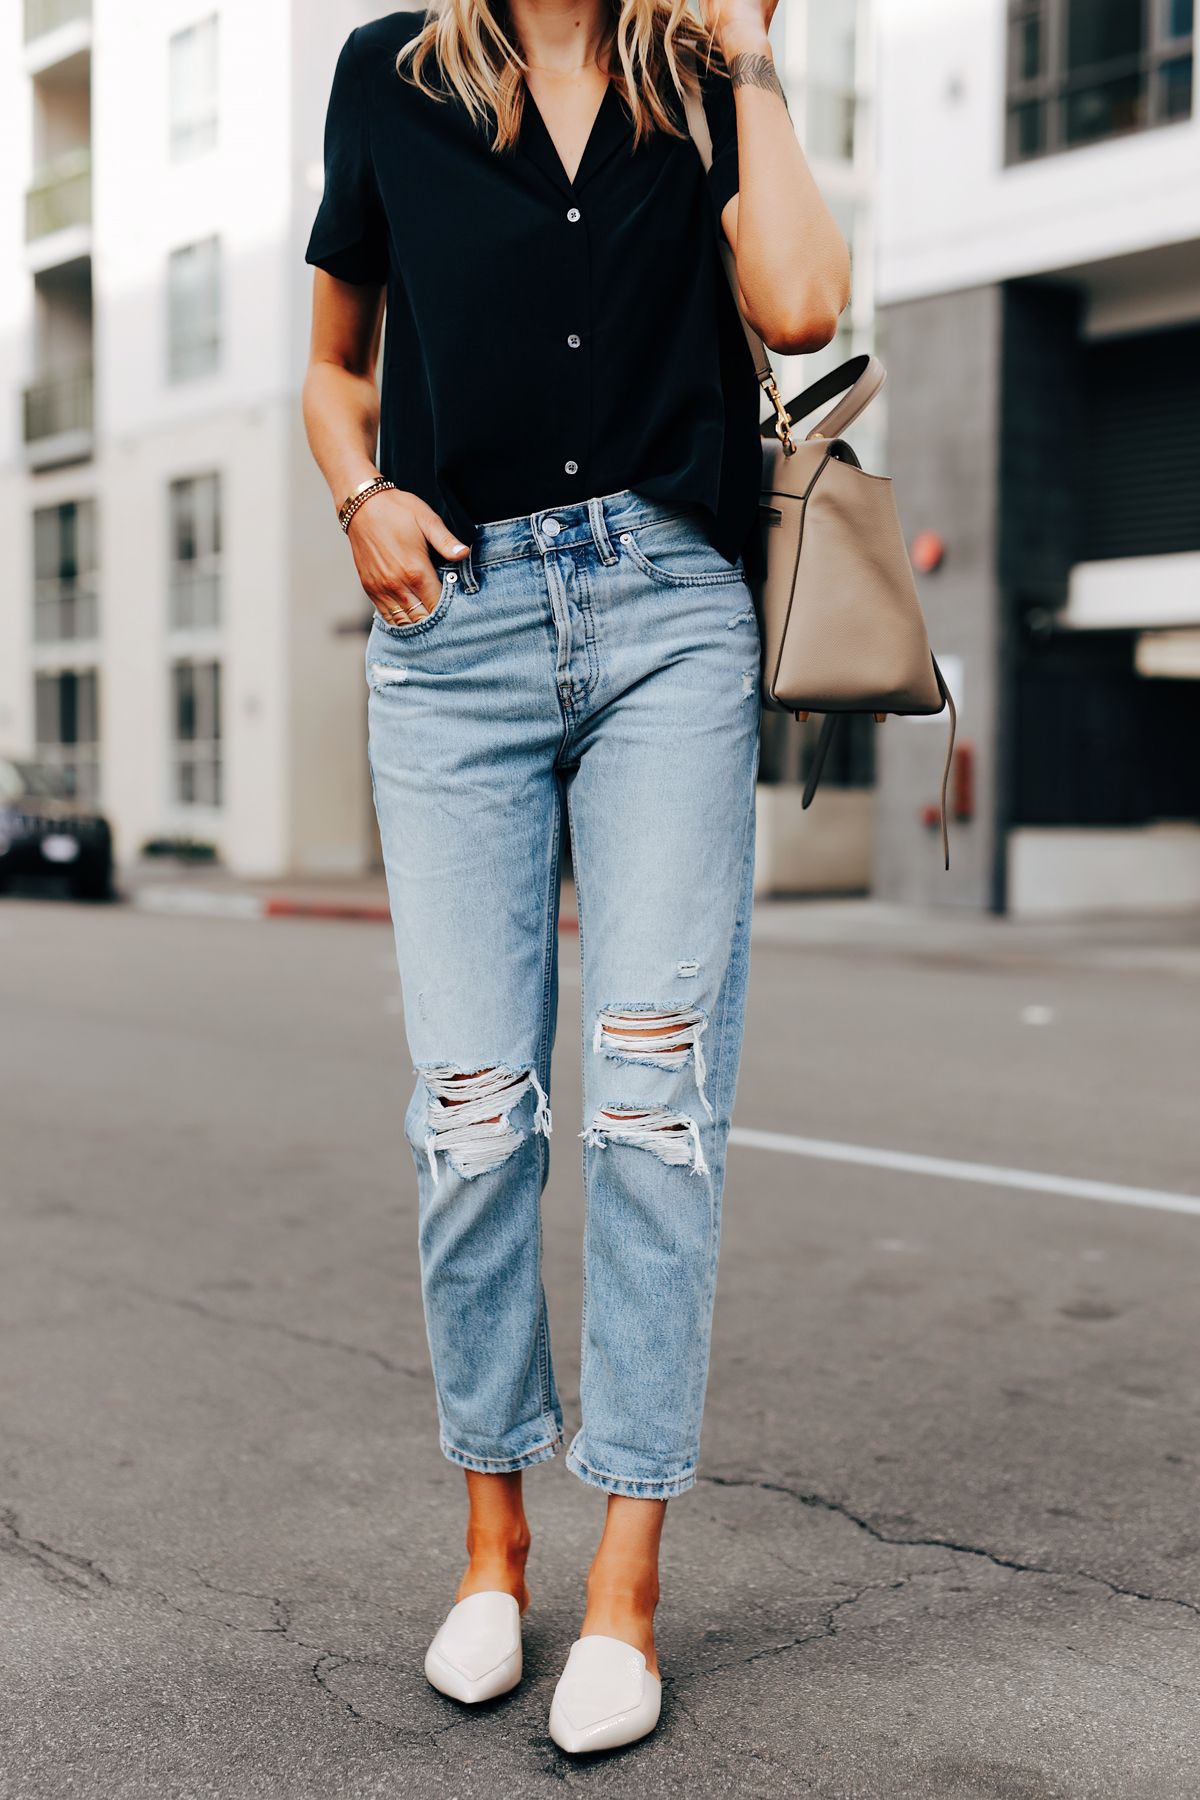 Ripped boyfriend jeans outfit, Ripped jeans | Casual Outfit Ideas For 2020  | Casual Outfits, Casual wear, Mom jeans